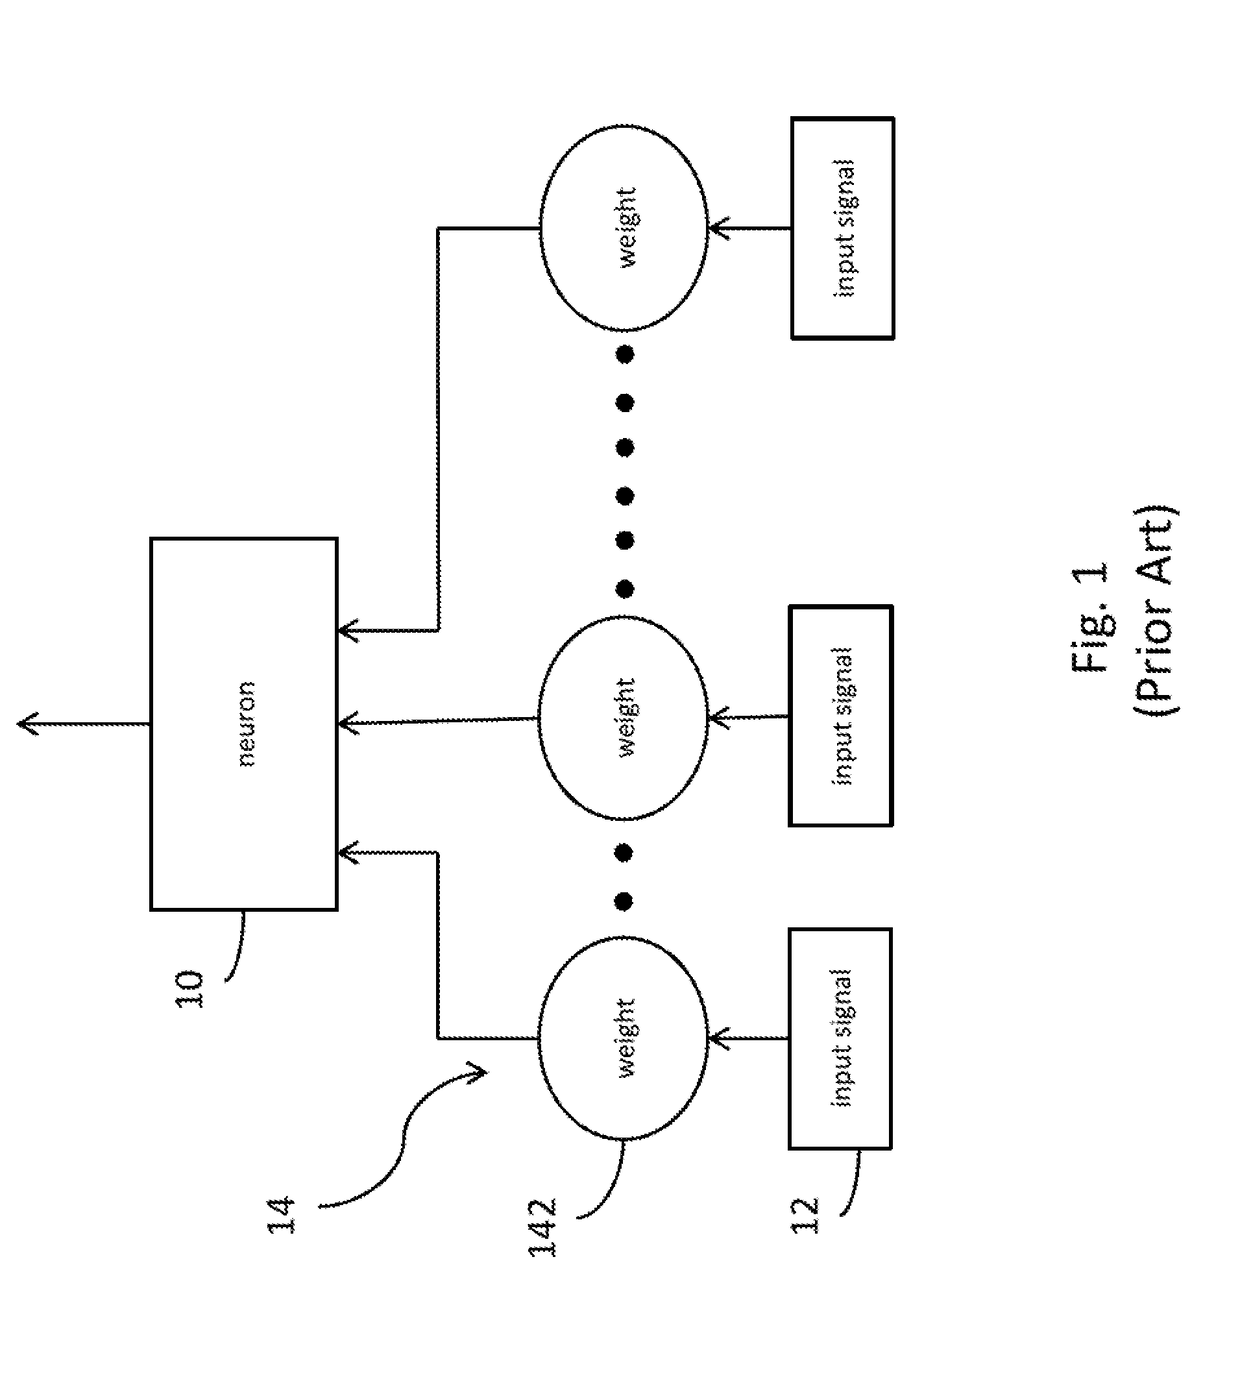 Neural network processing system